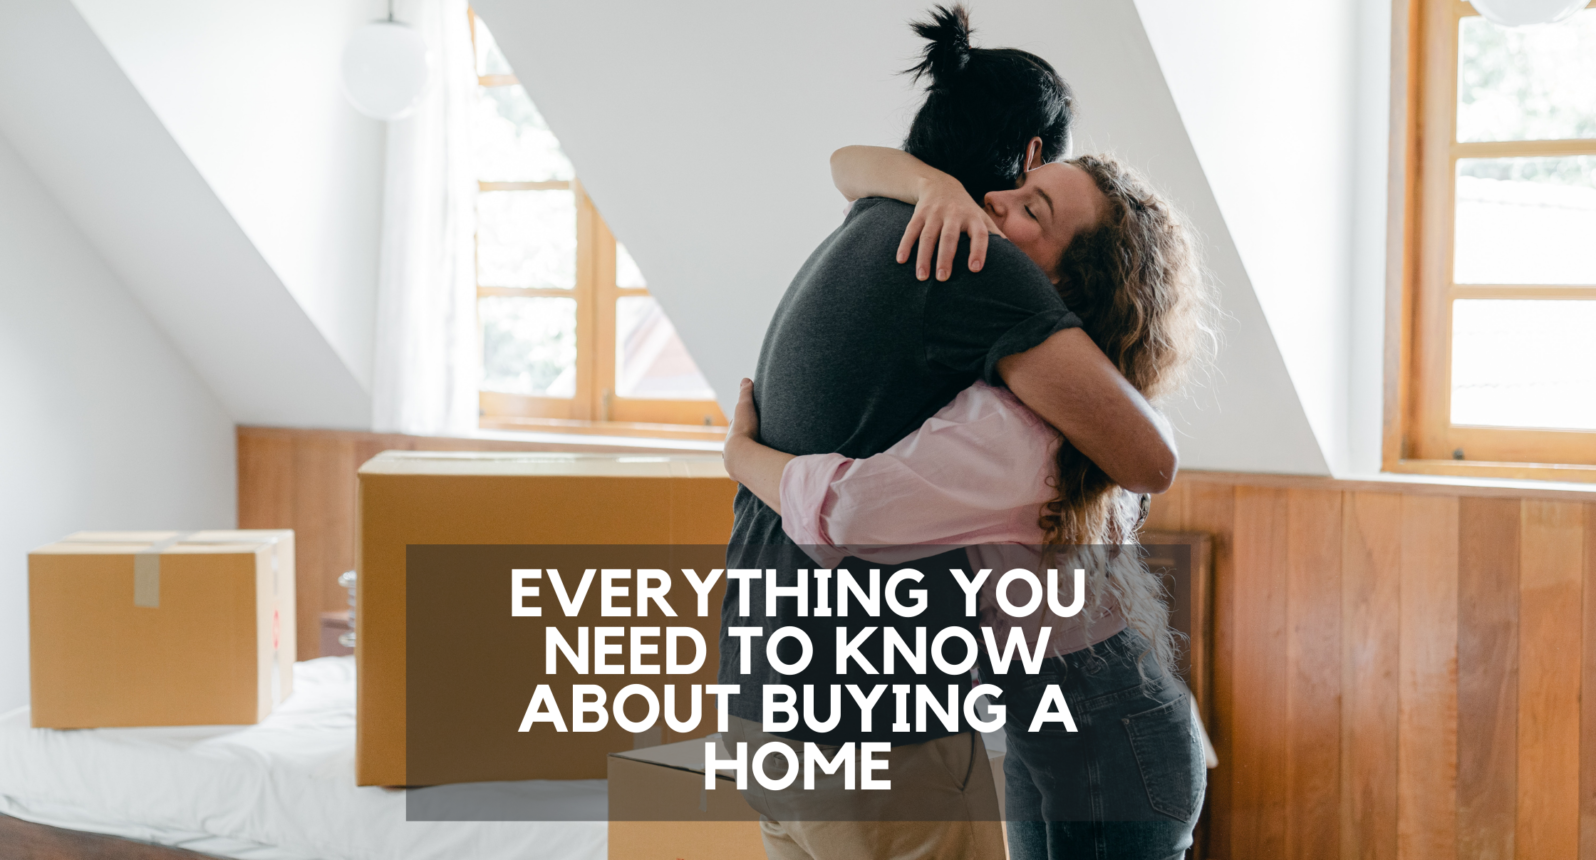 Everything you need to know about buying a home